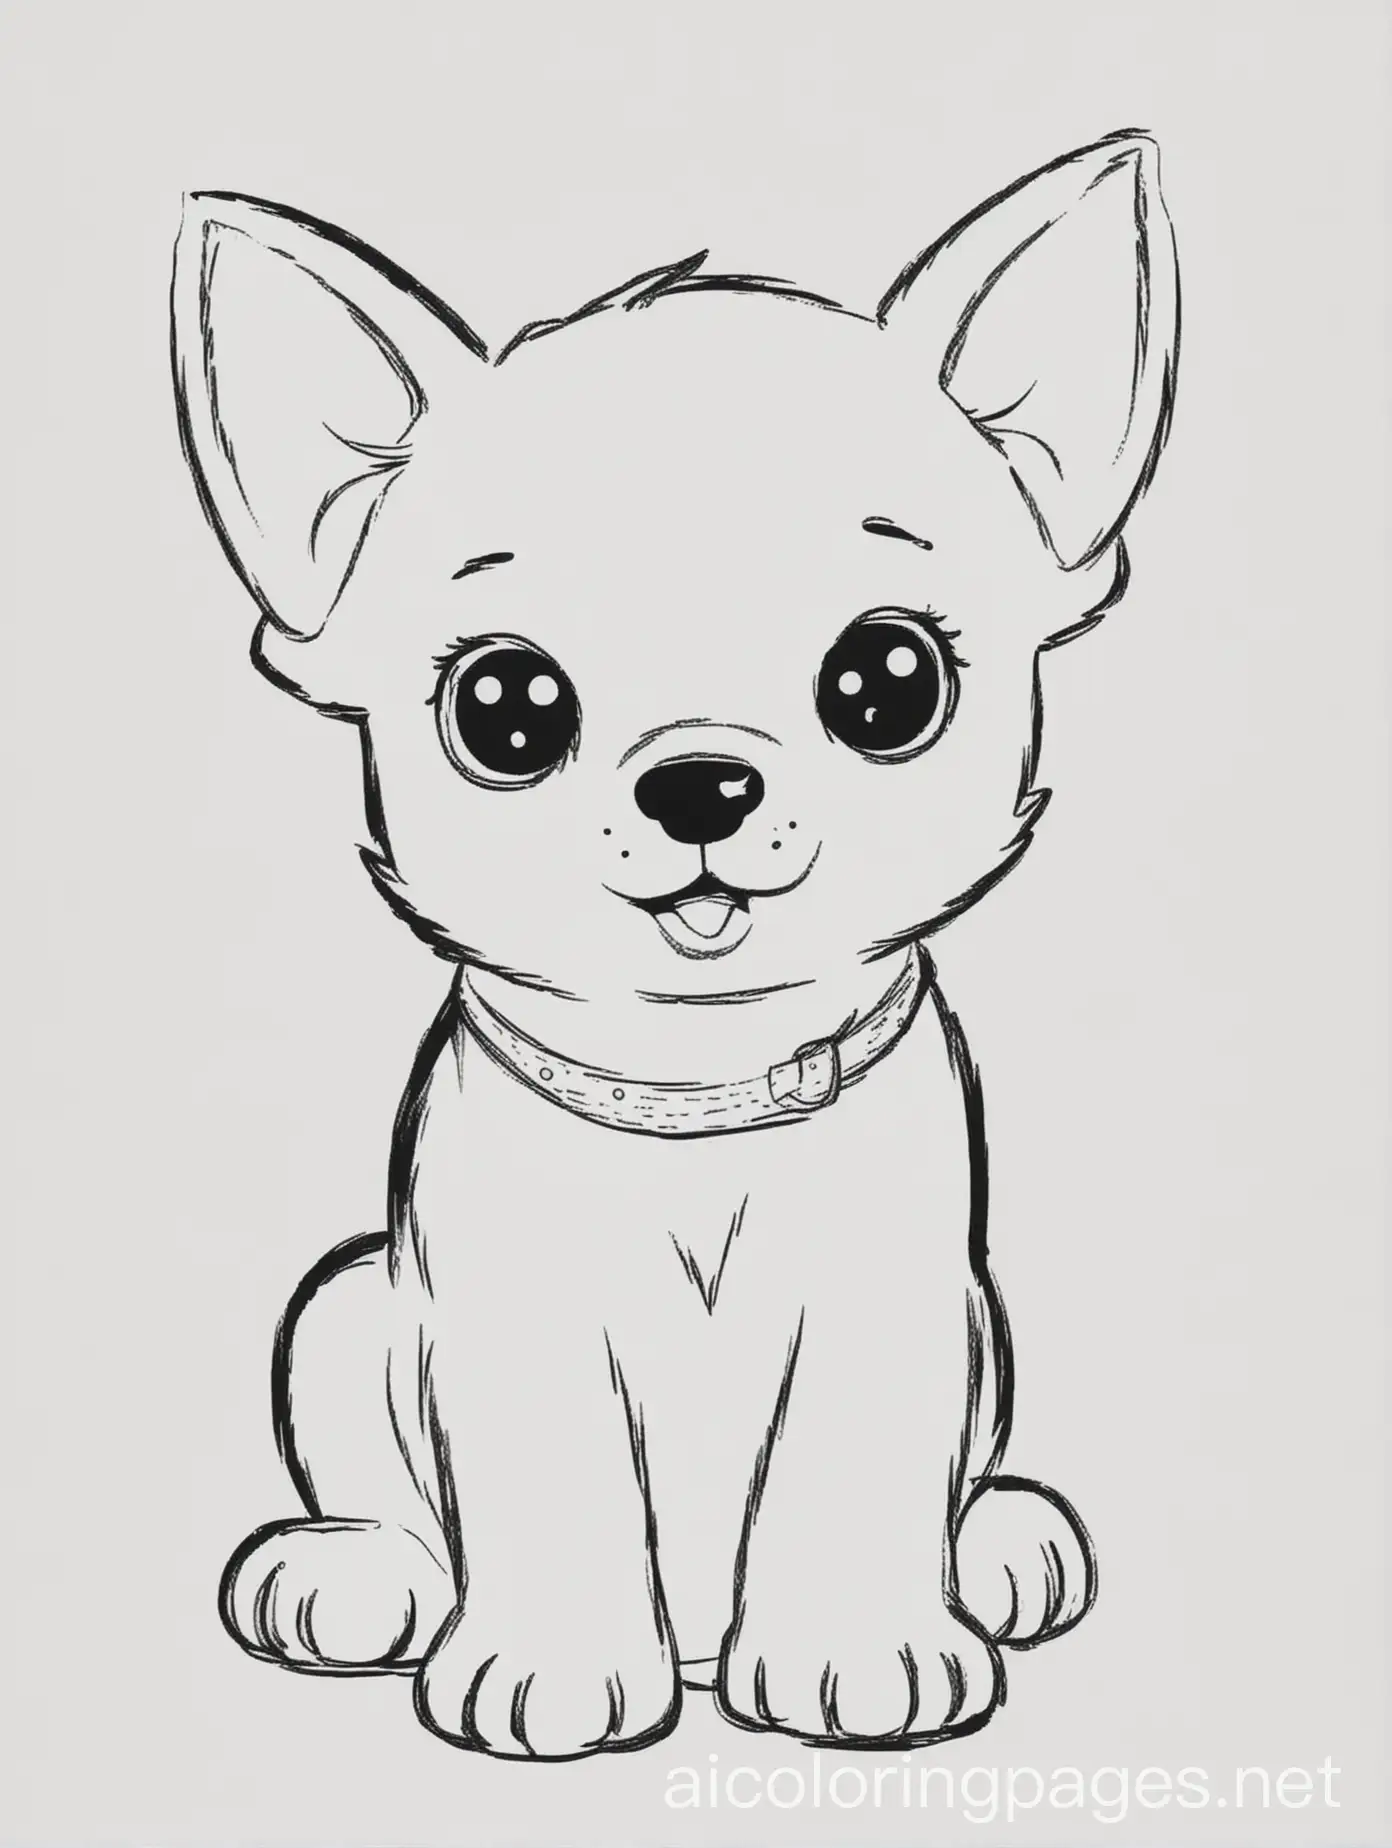 Simple-Black-and-White-Dog-Coloring-Page-for-Kids